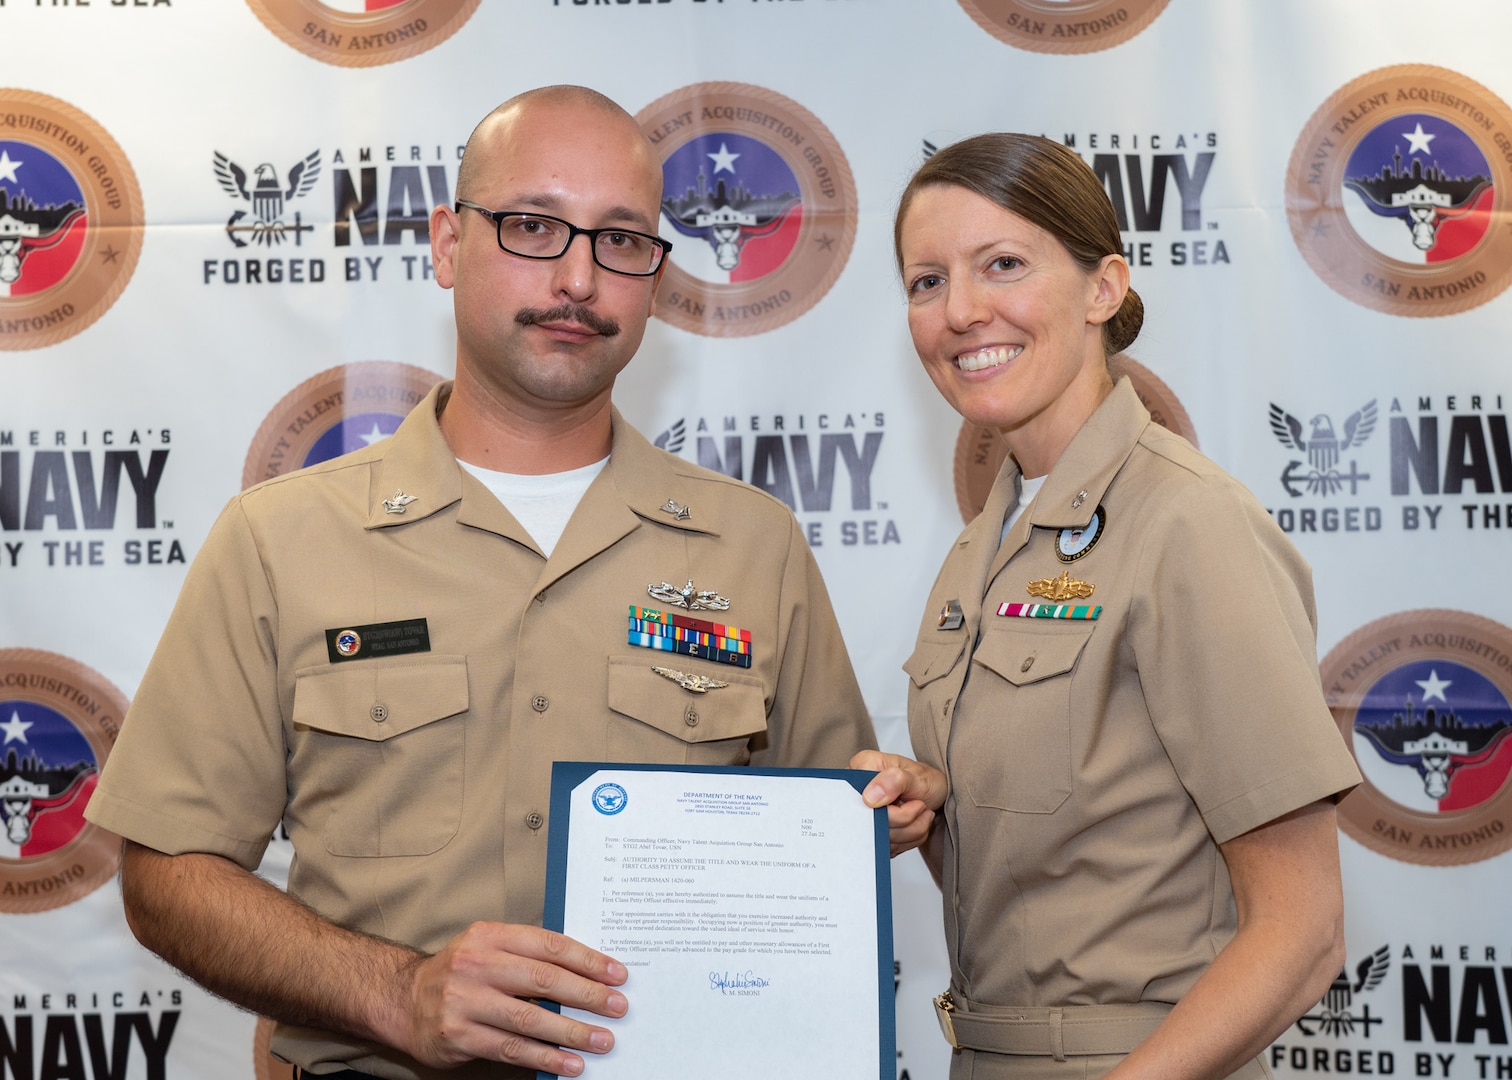 Navy Talent Acquisition Group San Antonio hosts frocking ceremony